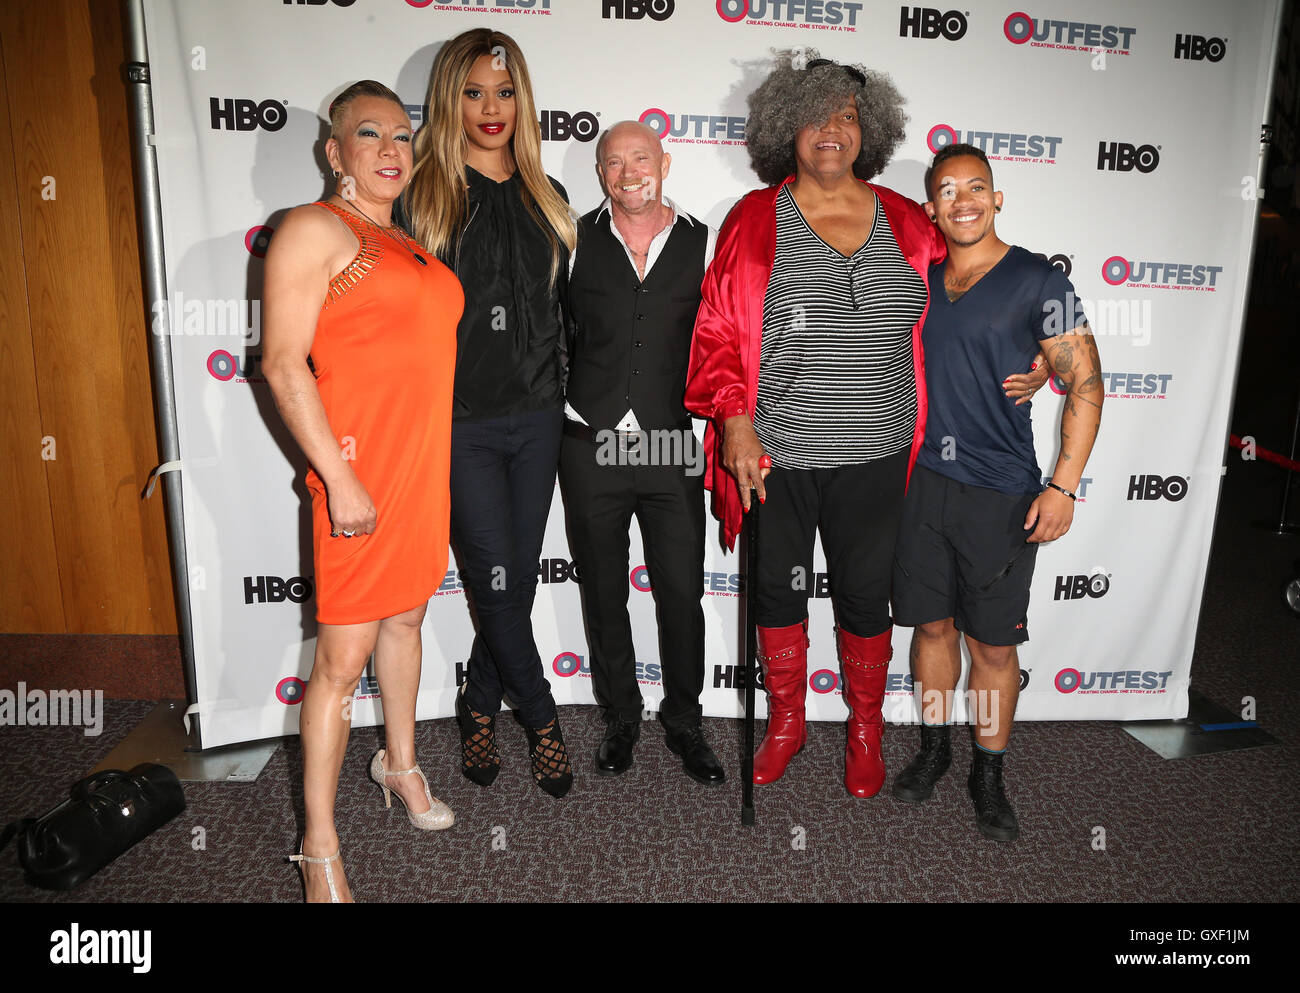 Outfest 2016 Screening Of 'The Trans List'  Featuring: Bamby Salcedo, Laverne Cox, Buck Angel, Miss Major, Shane Ortega Where: West Hollywood, California, United States When: 16 Jul 2016 Stock Photo